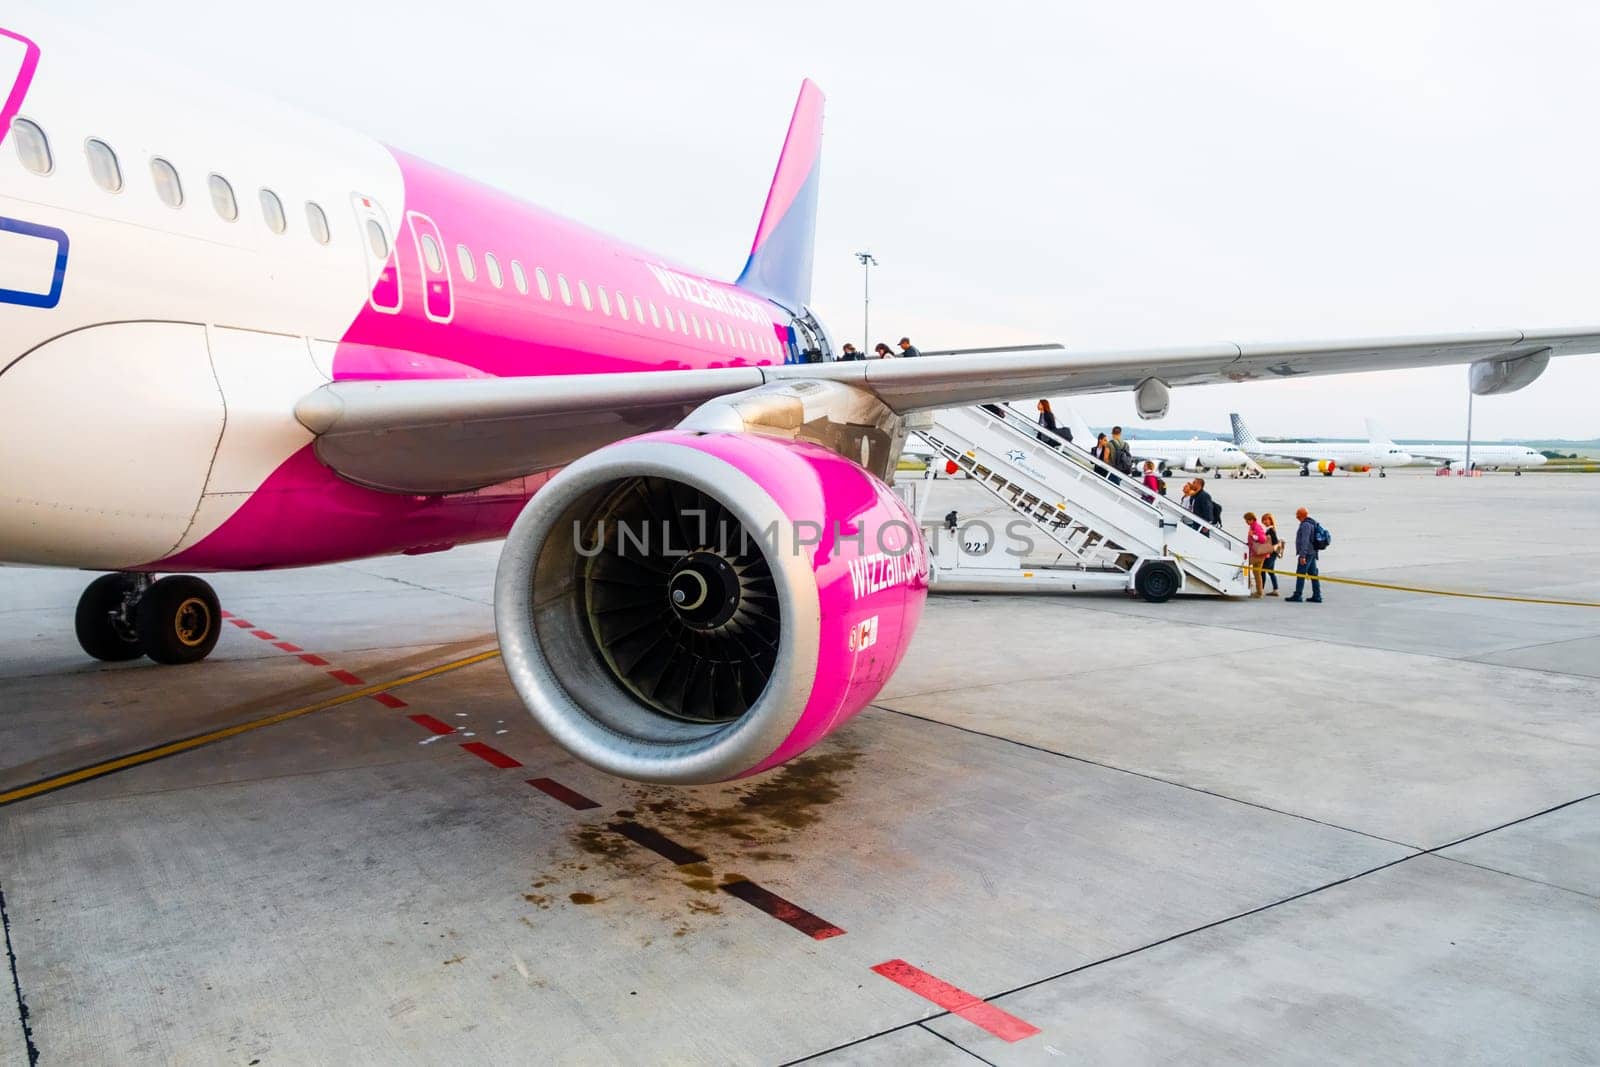 Close up turbine of WIzzair aircraft in airport by vladimka